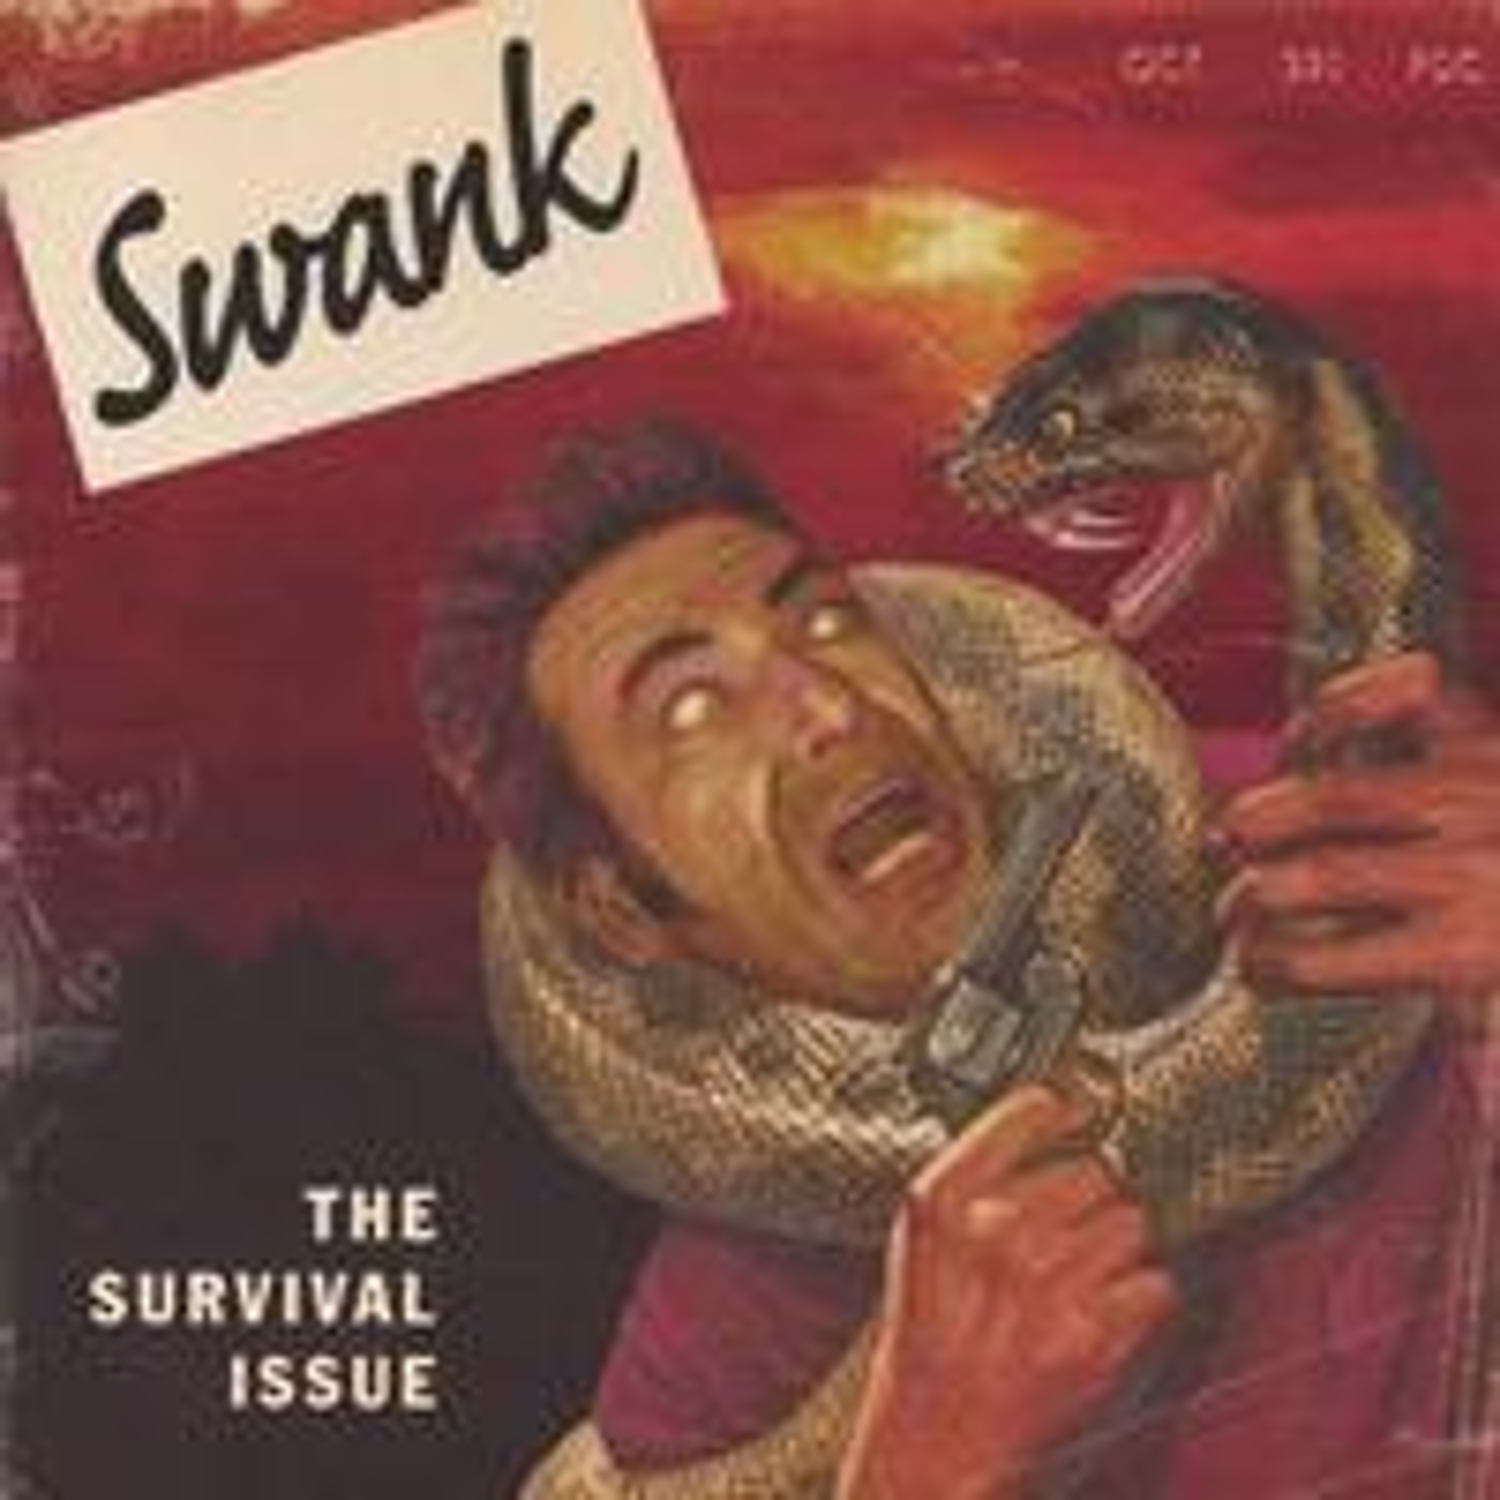 Swank / The Survival Issue